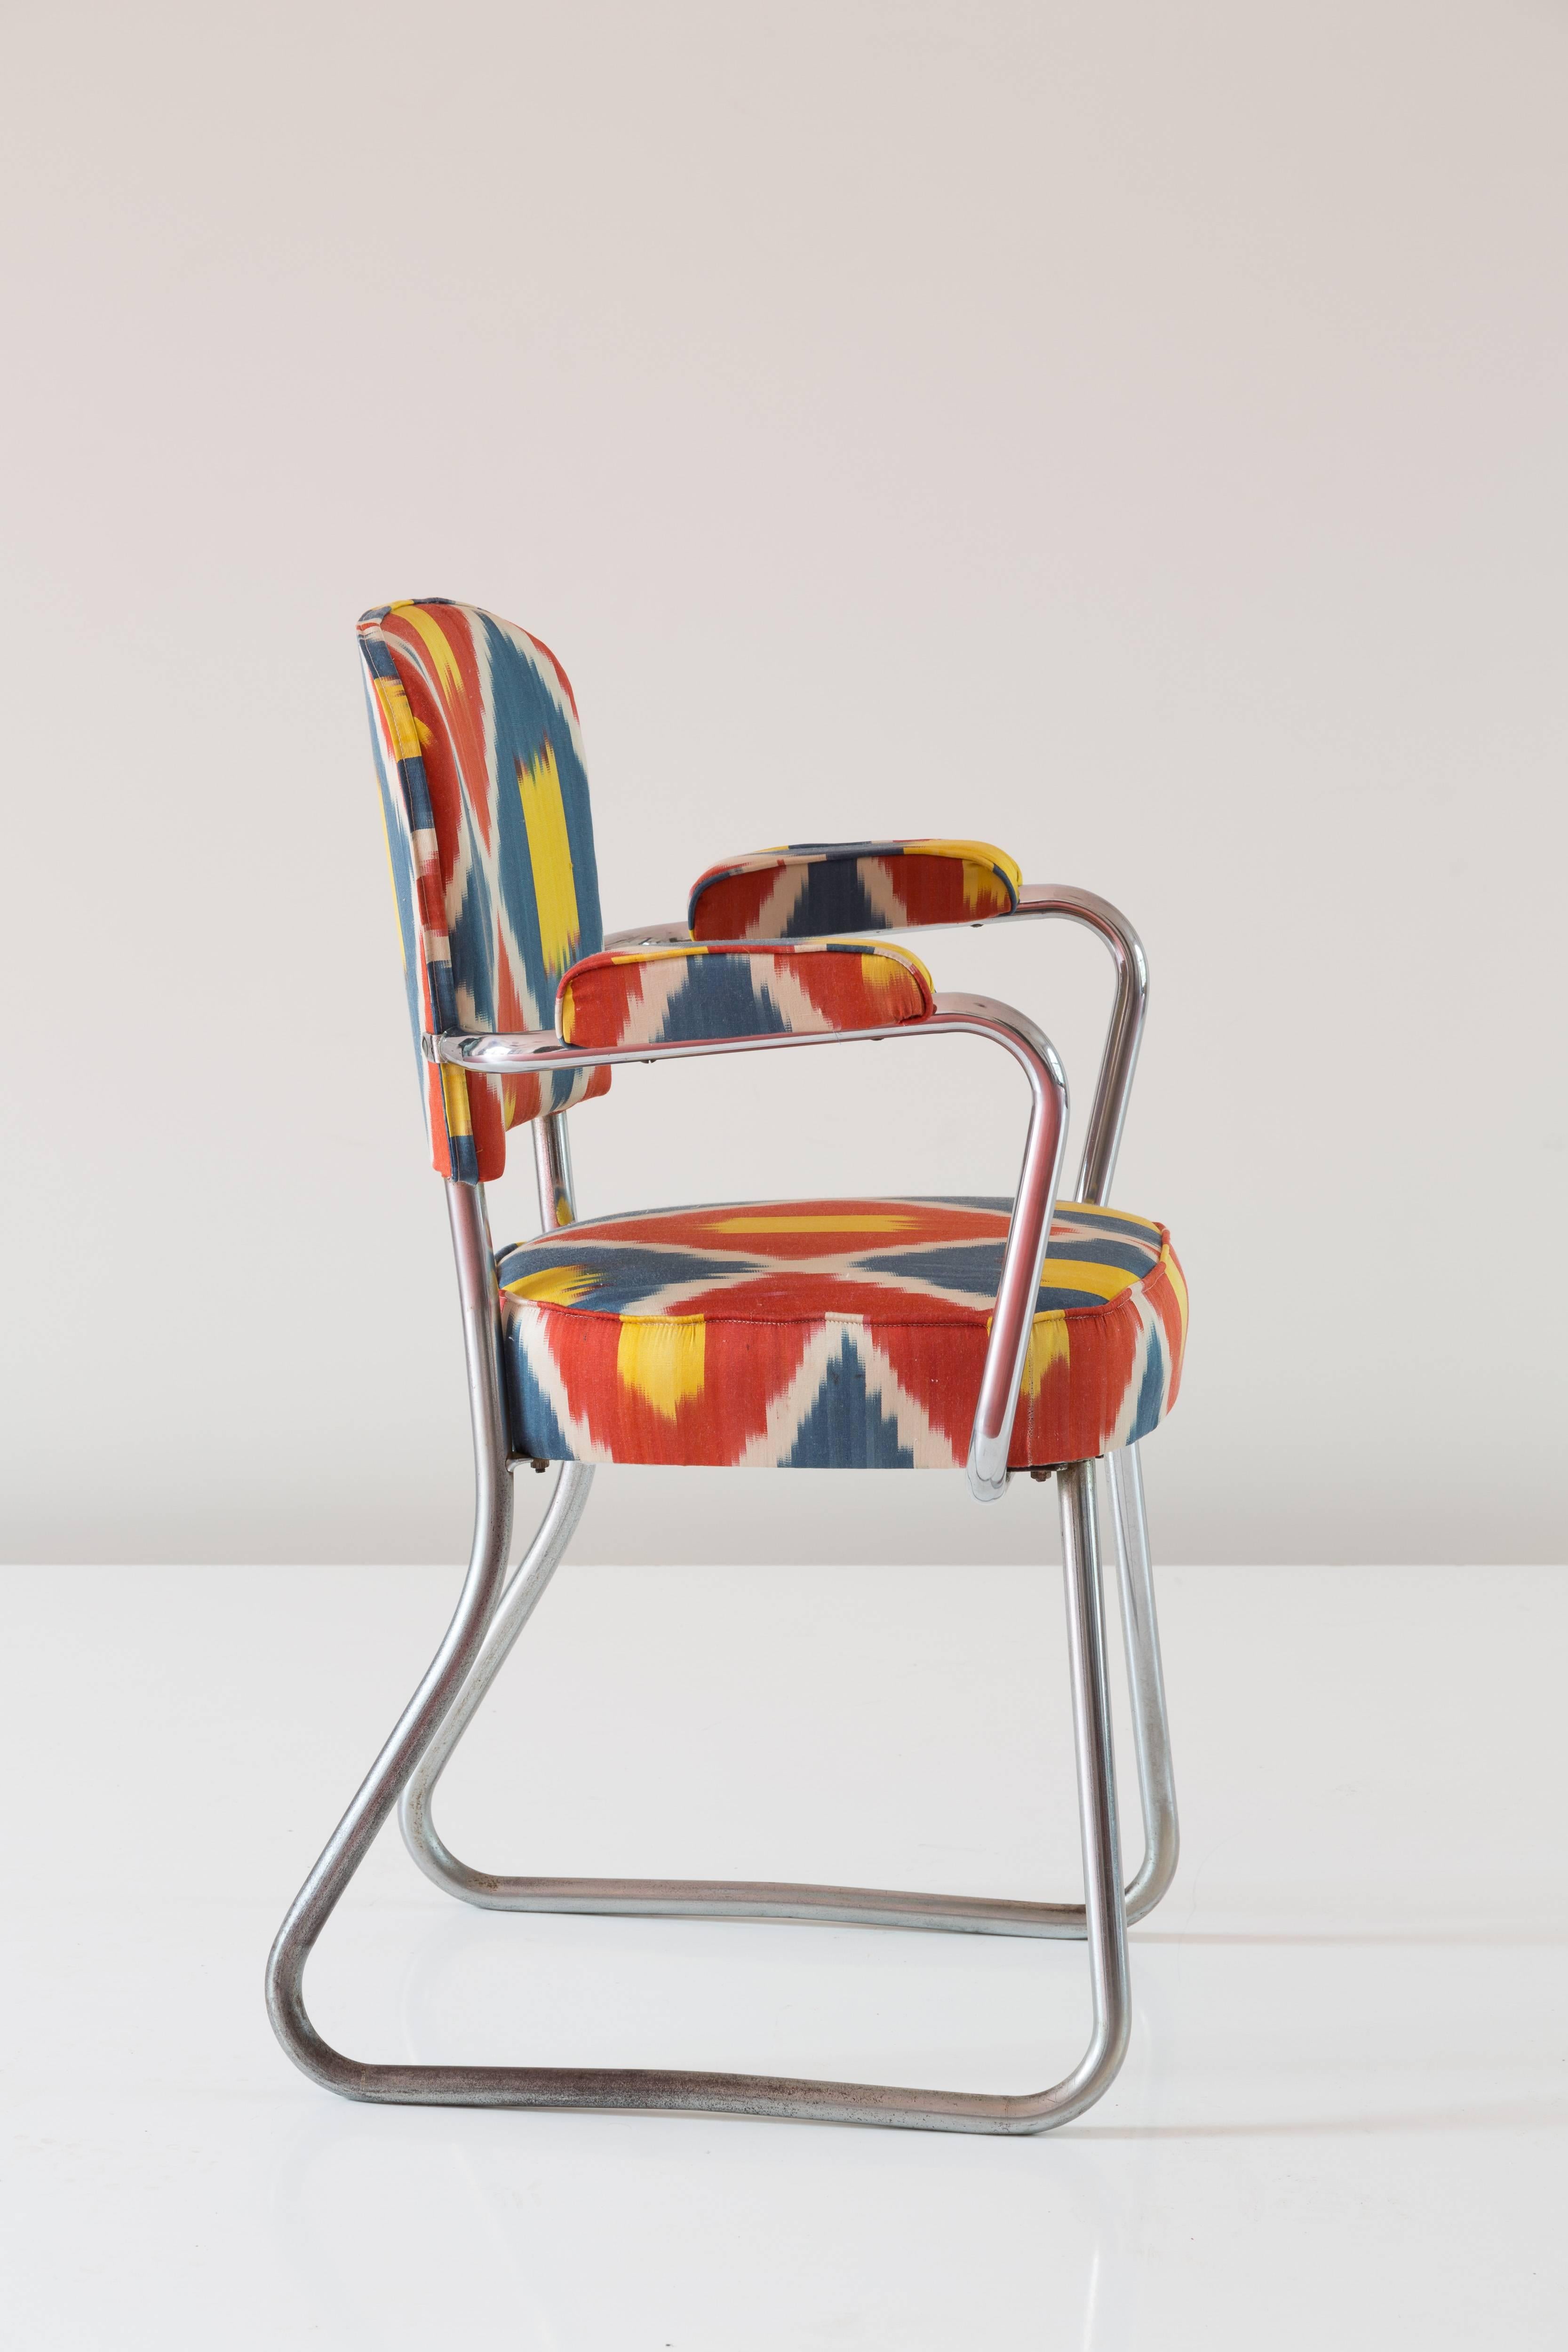 Modern Iconic Gio Ponti Armchair from 